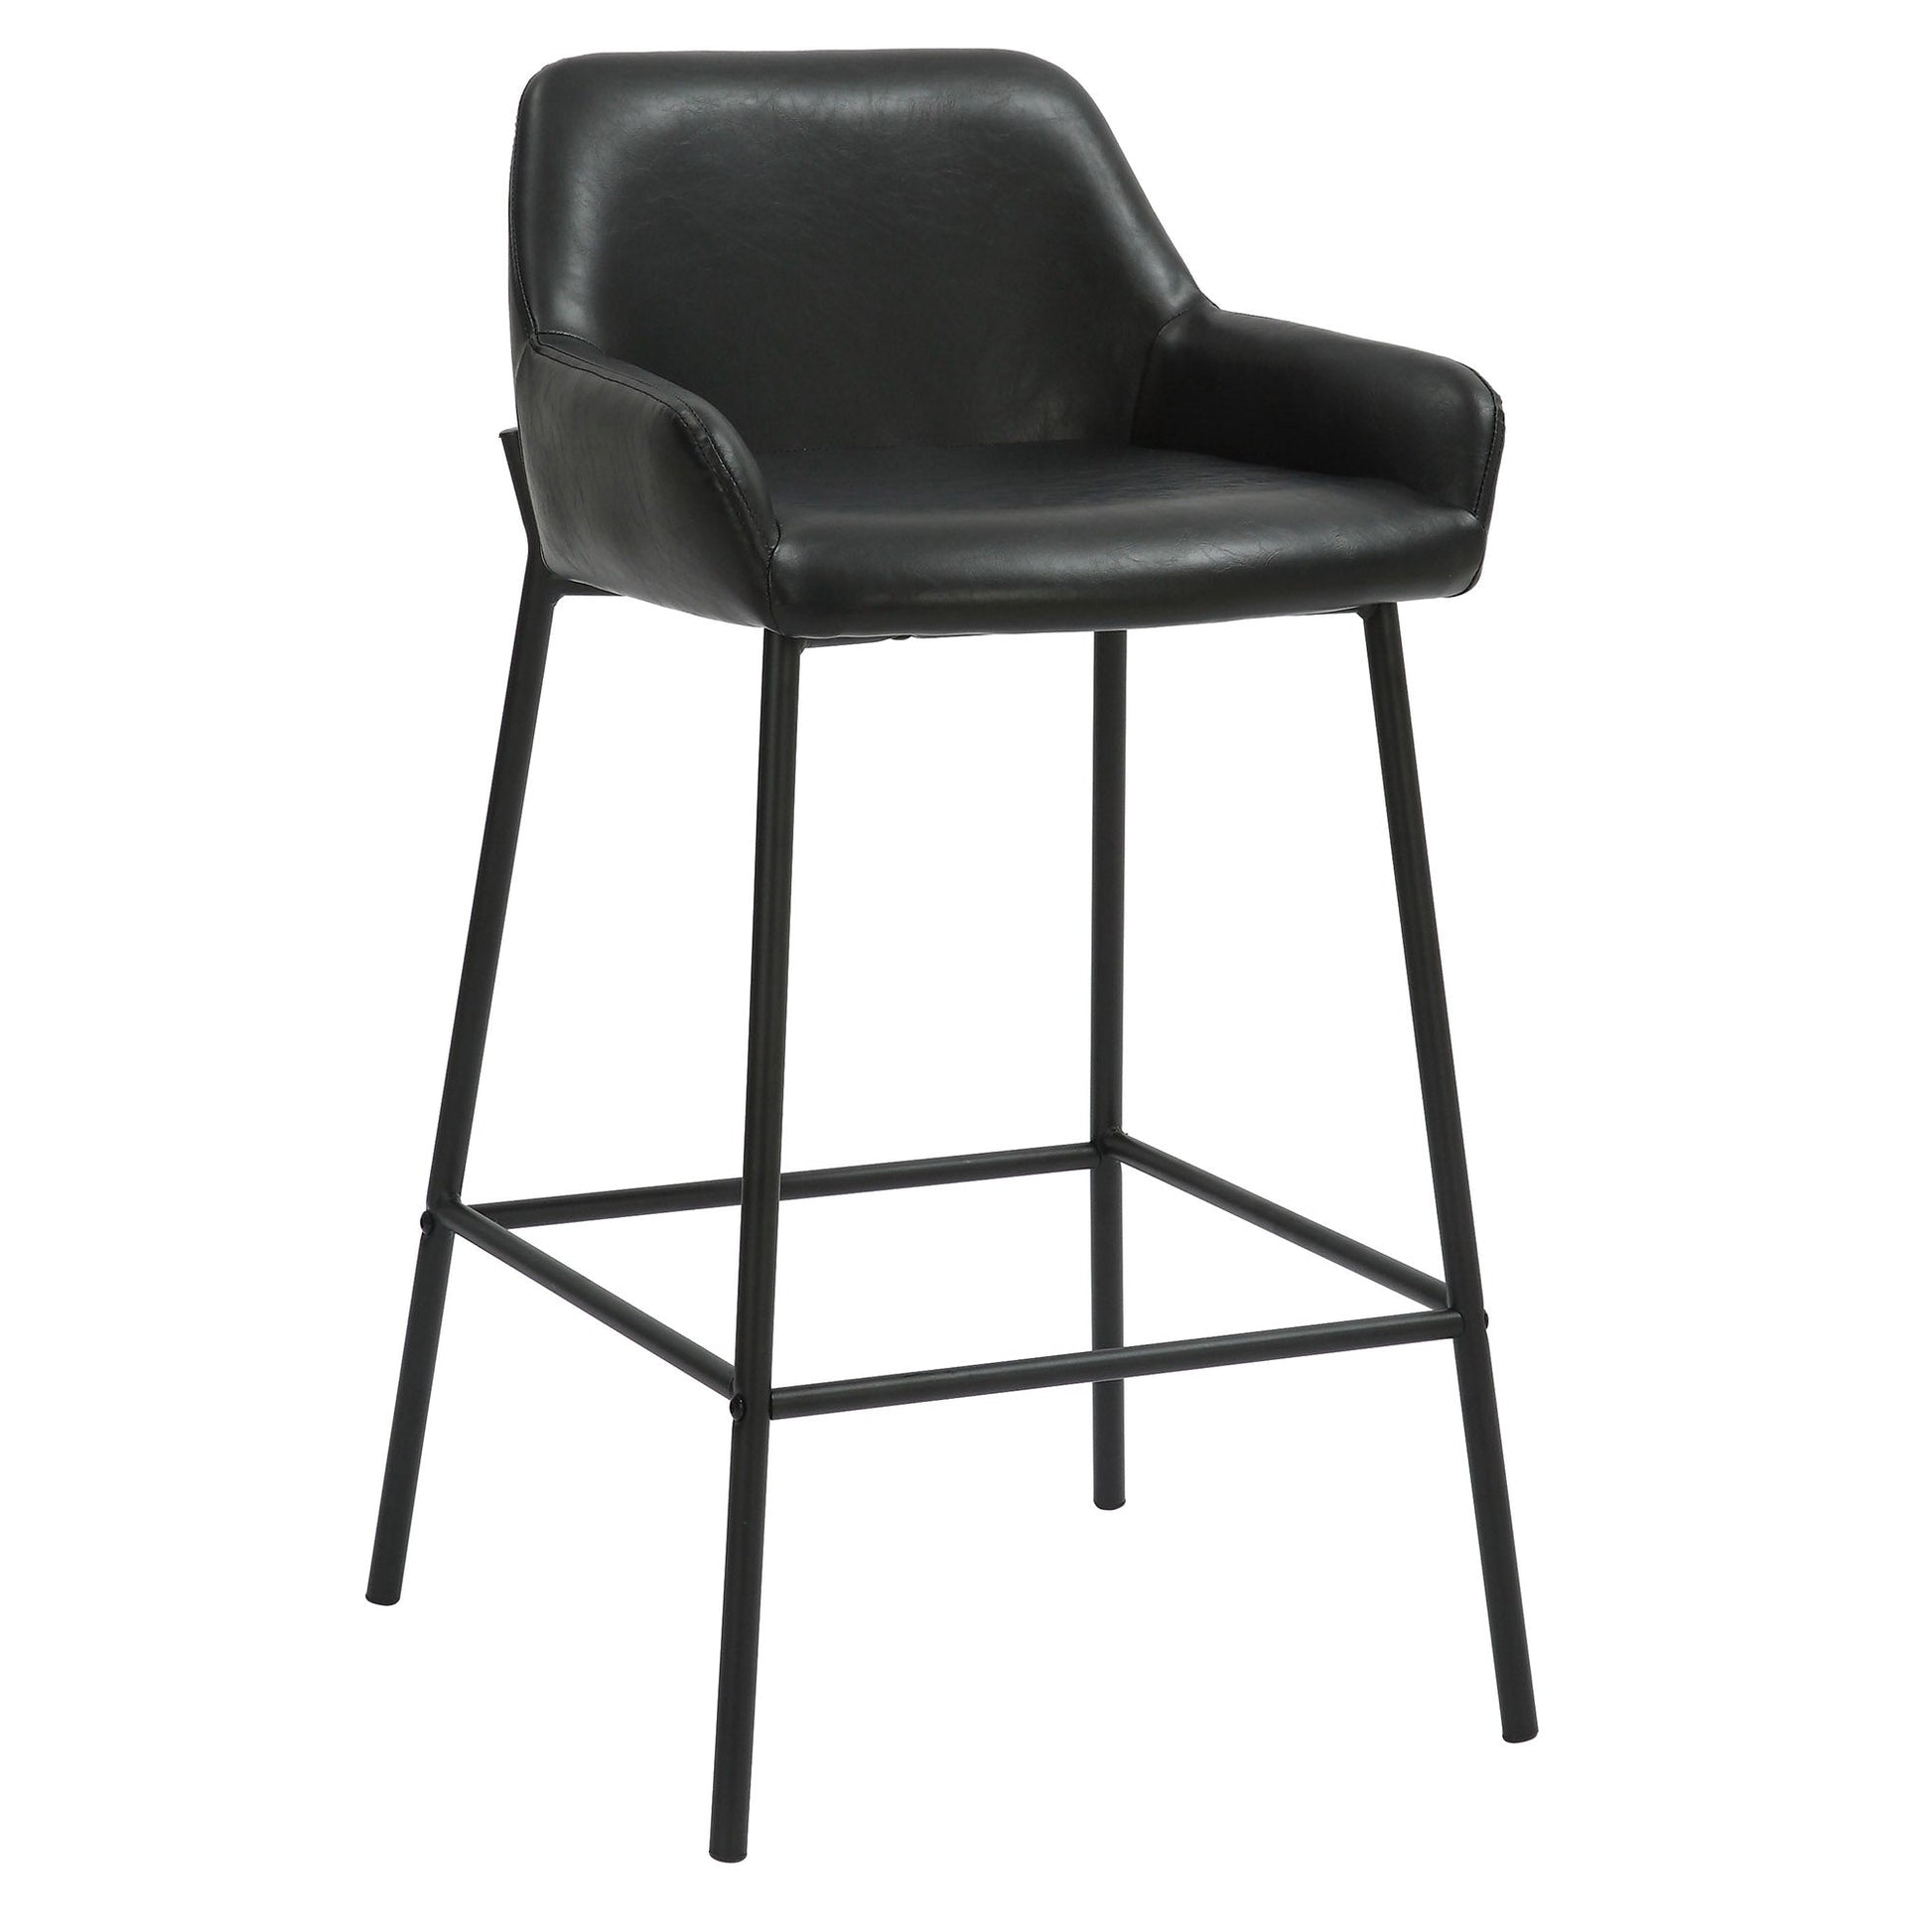 26 inch Bar Stools | Sets of 2 | Baily Black - Your Bar Stools Canada